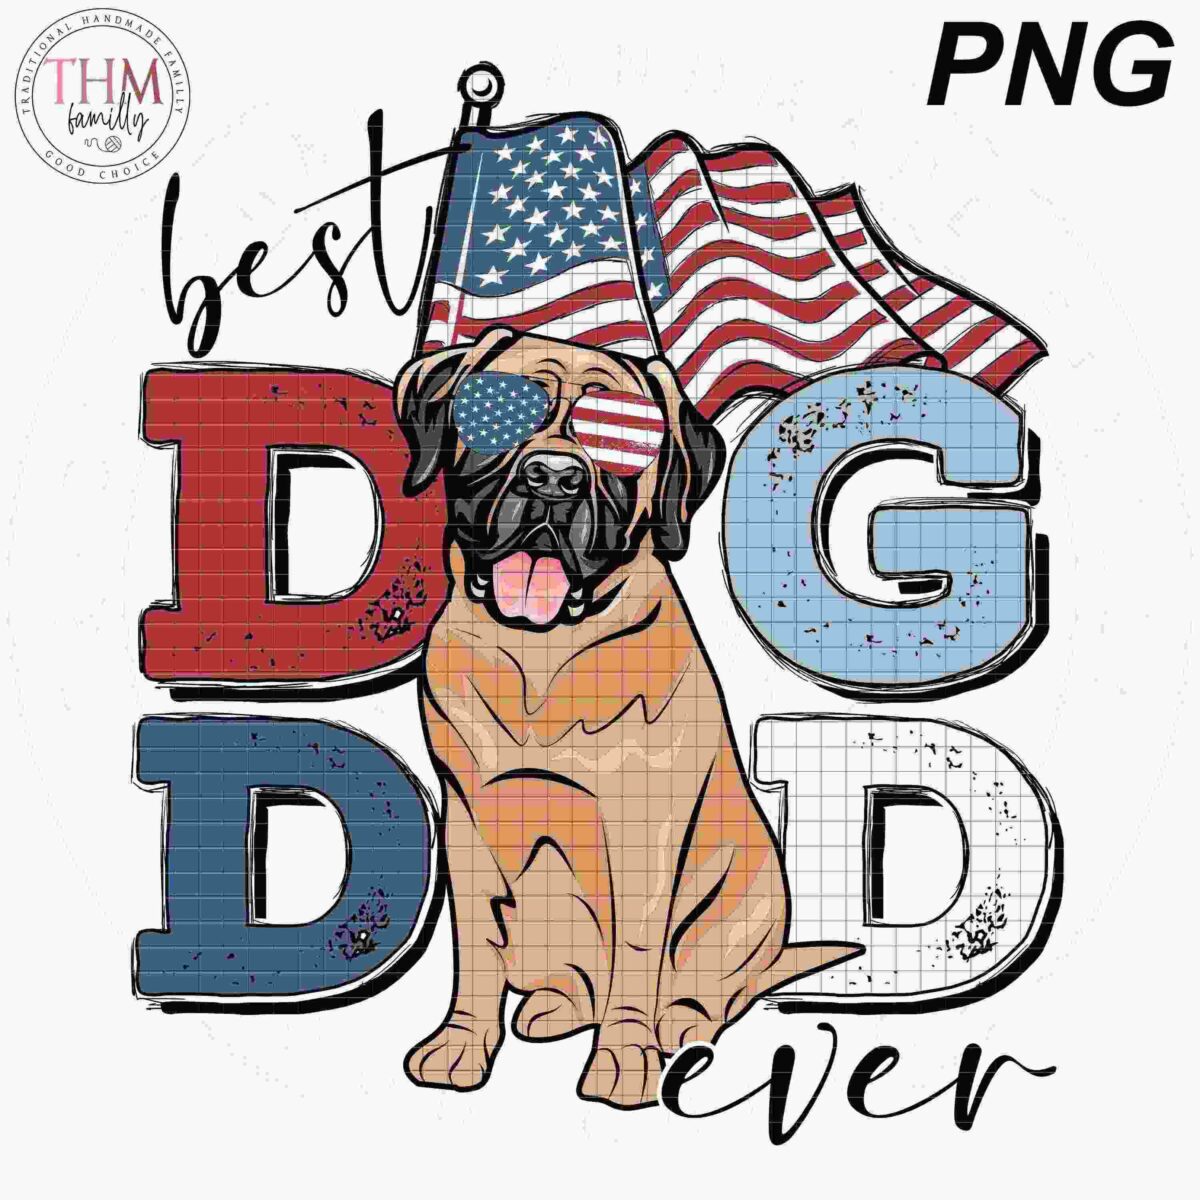 Illustration of a dog wearing American flag sunglasses, sitting in front of letters spelling "Best Dog Dad Ever," with an American flag in the background.